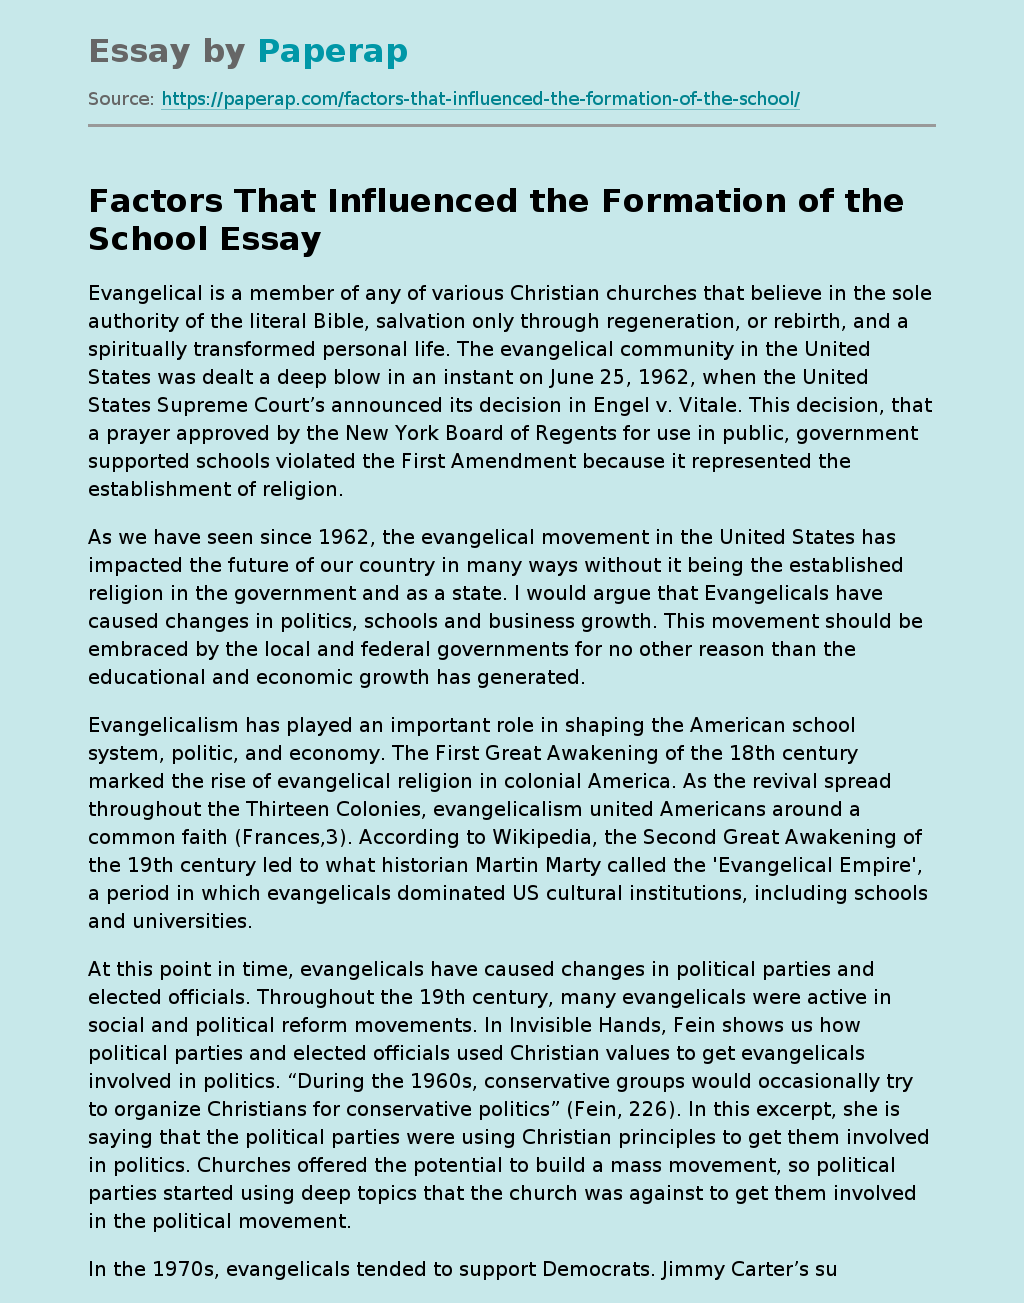 Factors That Influenced the Formation of the School